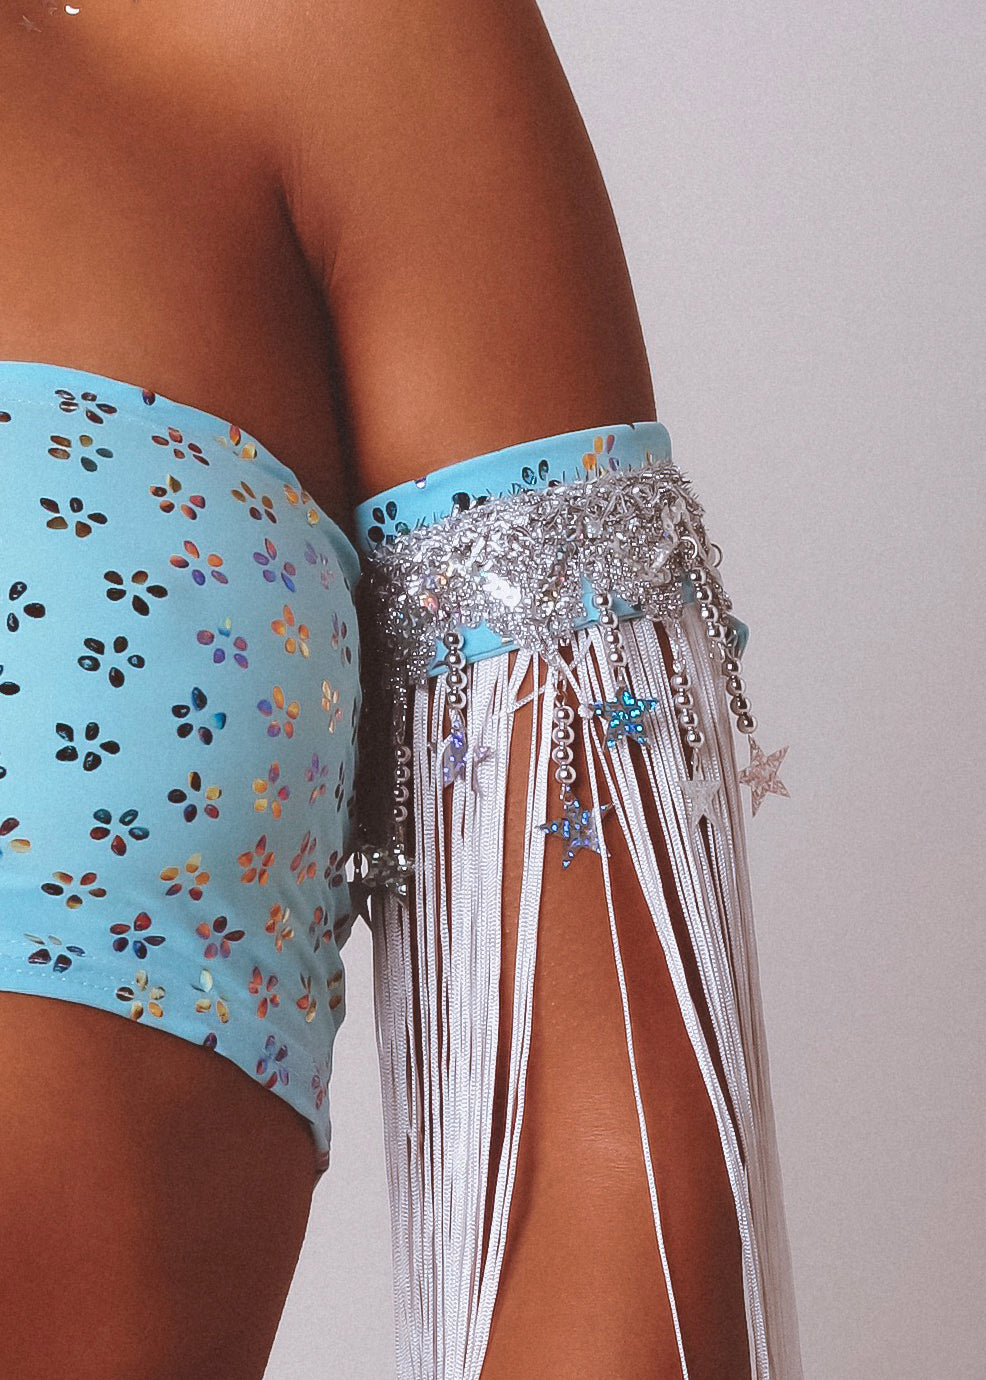 Baby Blue Gypsy Star and White Long Fringed Arm Cuffs